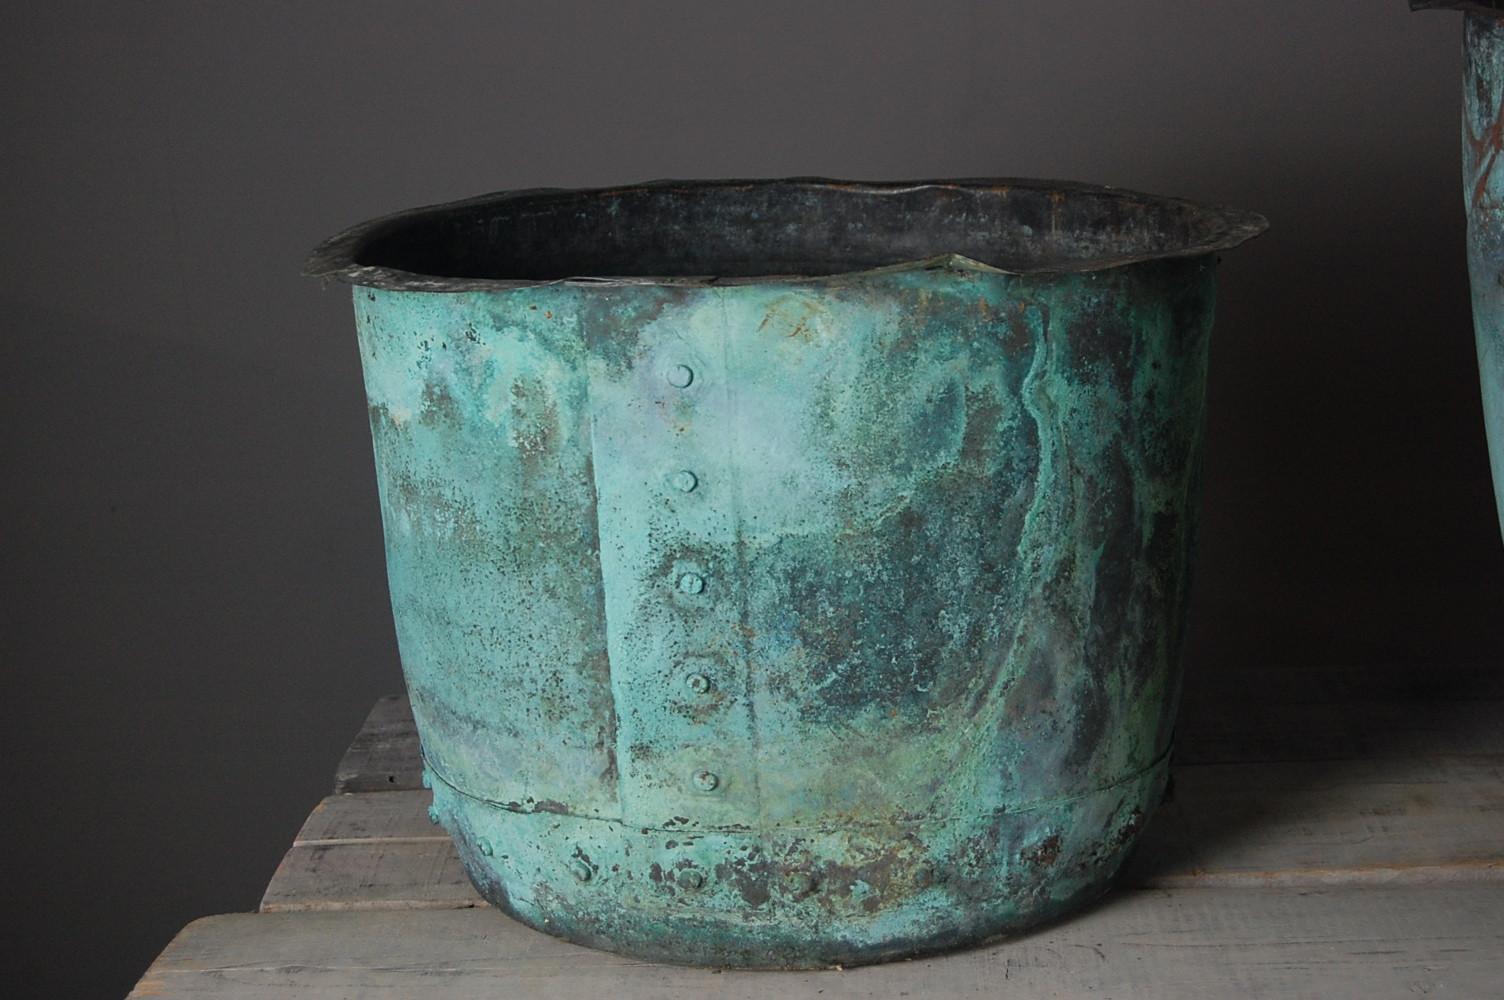 Wonderful collection of 3, naturally patinated, verdigris English Coppers. Mid-19th century and originally used as boiling pots, the wonderful natural vivid green patination is quite spectacular. This collection have been drilled to the base to be